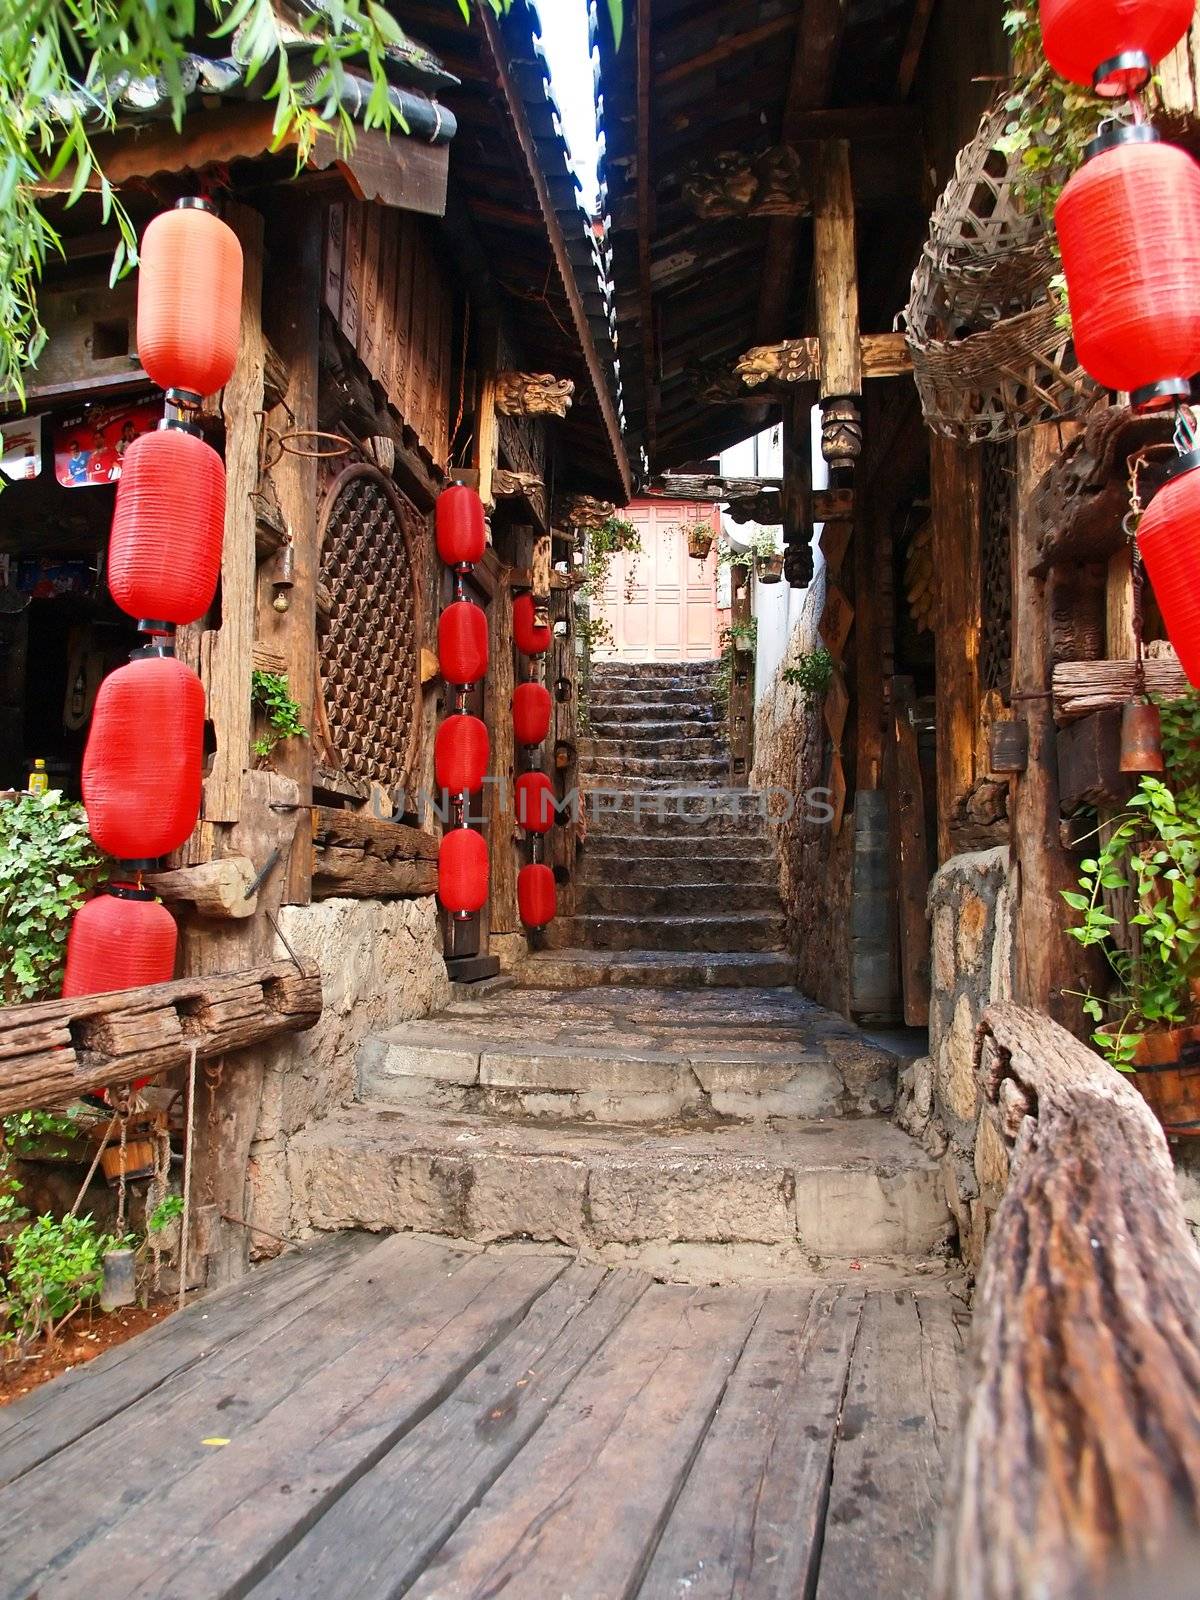 A tourist favorite historic town - Lijiang in Yunnan province China